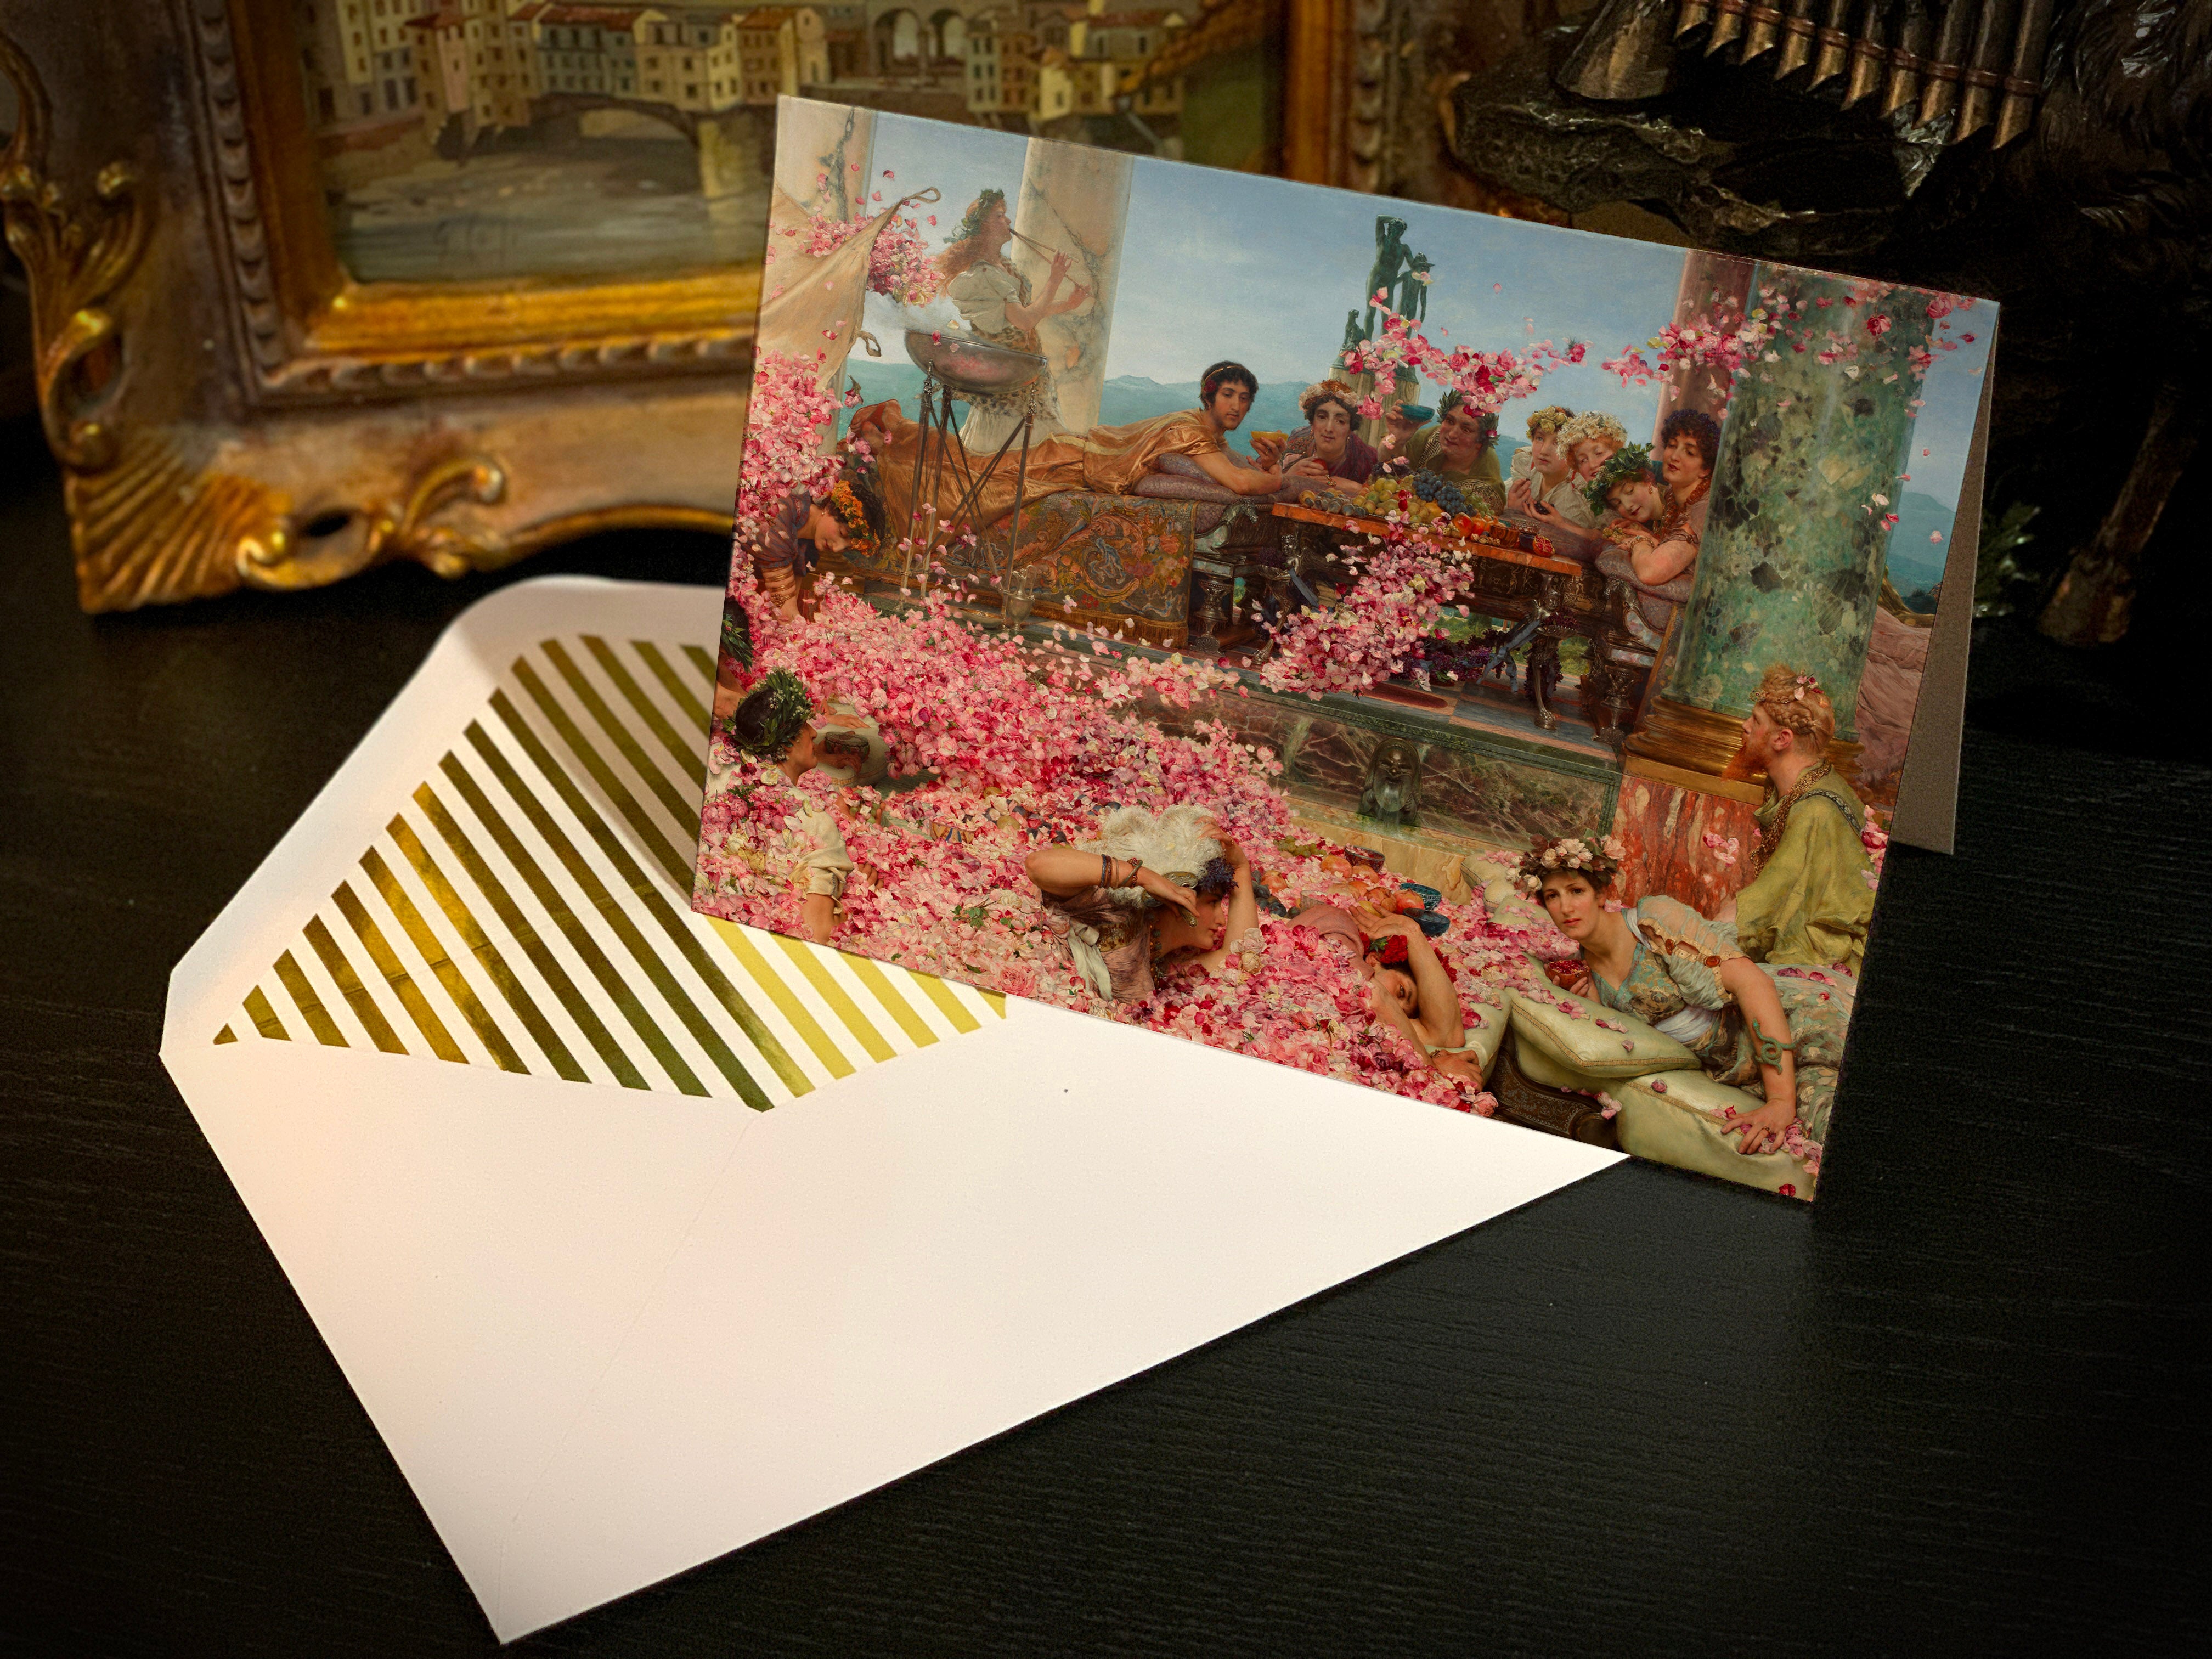 The Roses of Heliogabalus by Sir Lawrence Alma-Tadema, Greeting Card with Elegant Striped Gold Foil Envelope, 1 Card/Envelope